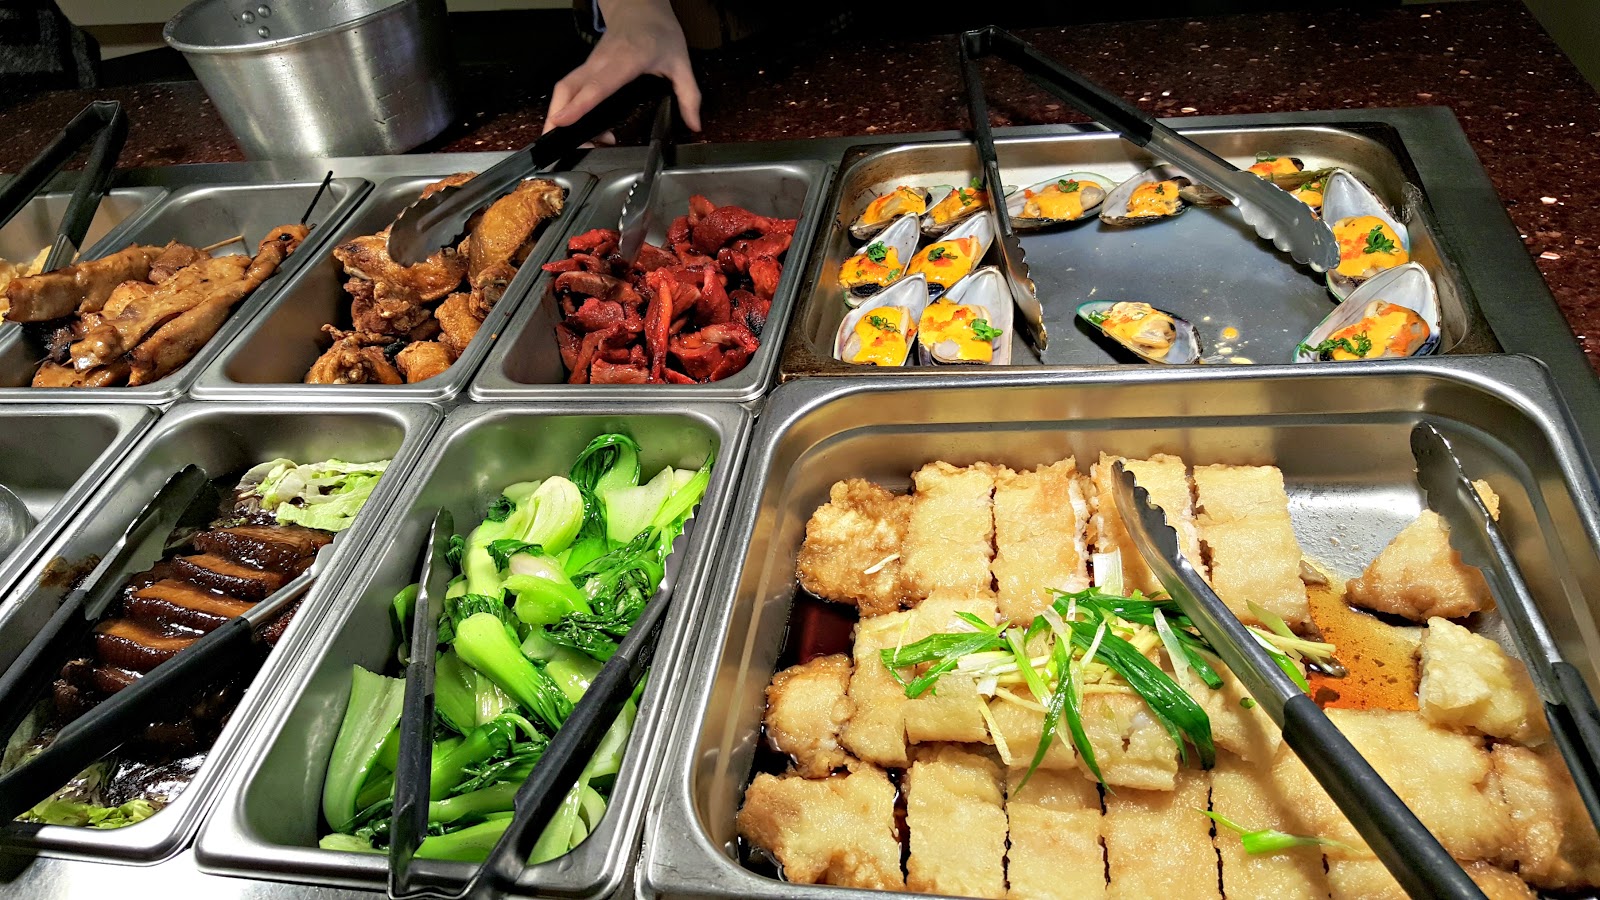 Chinese Buffet Restaurants Near Me That Deliver - Latest ...